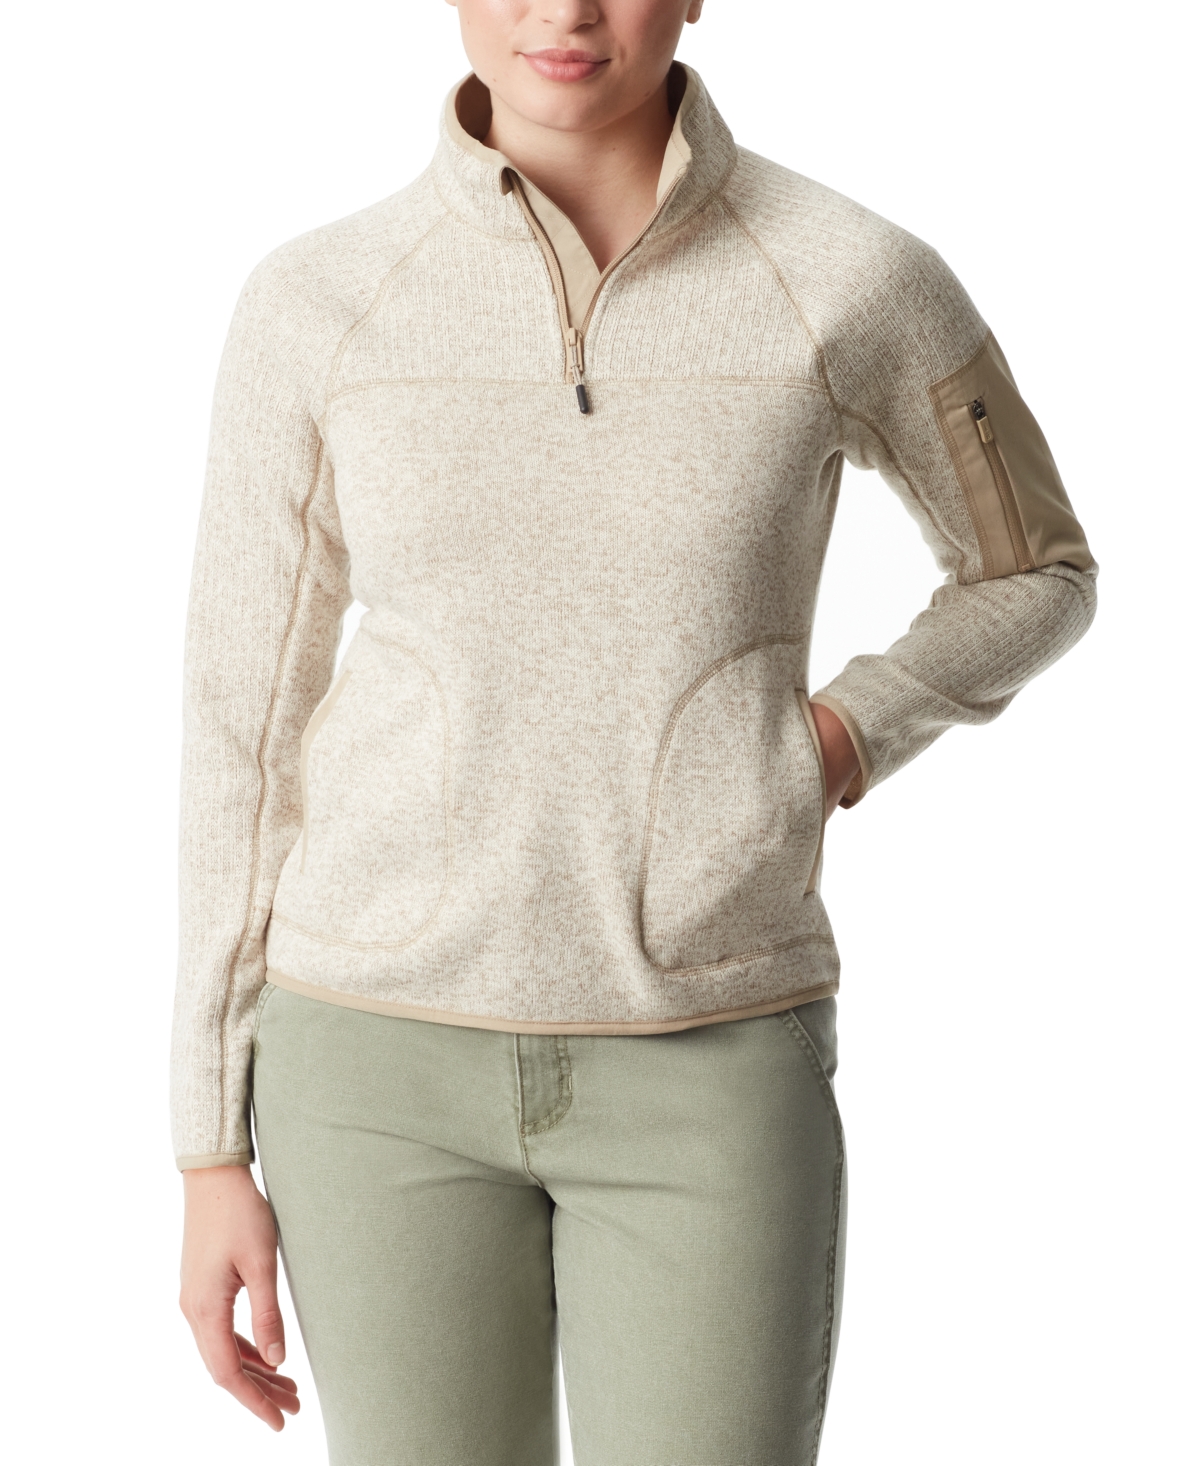 Women's Mixed-Media Pullover Sweater - FORGED IRON